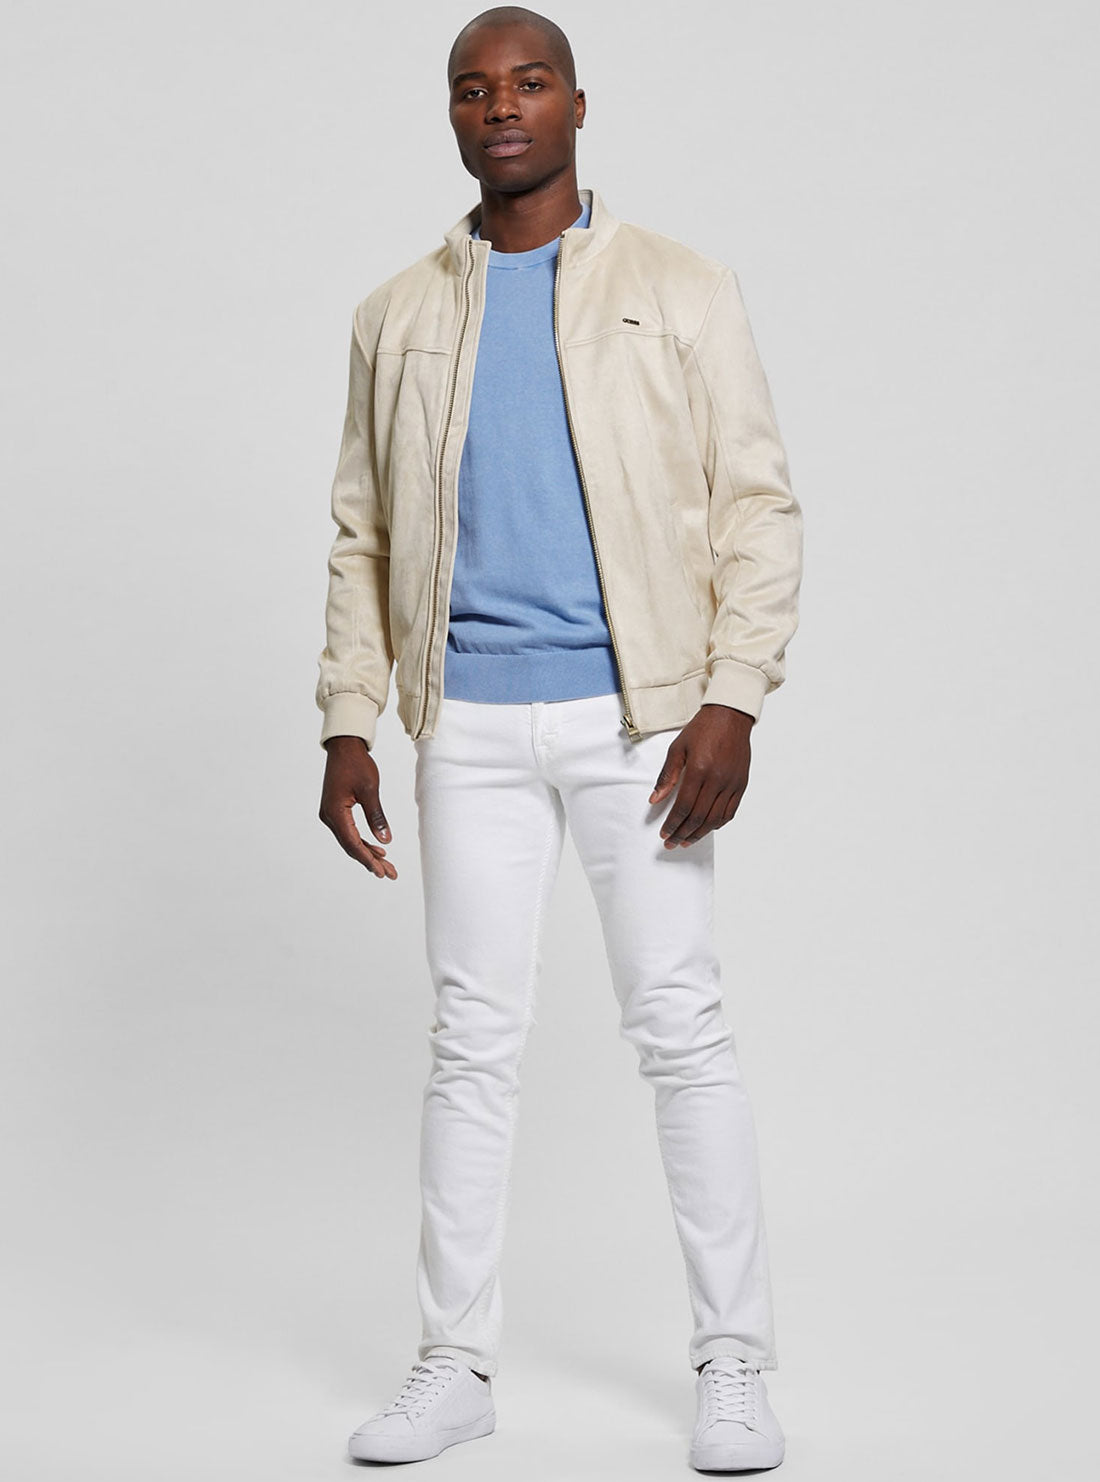 GUESS Cream Soft Suede Jacket full view